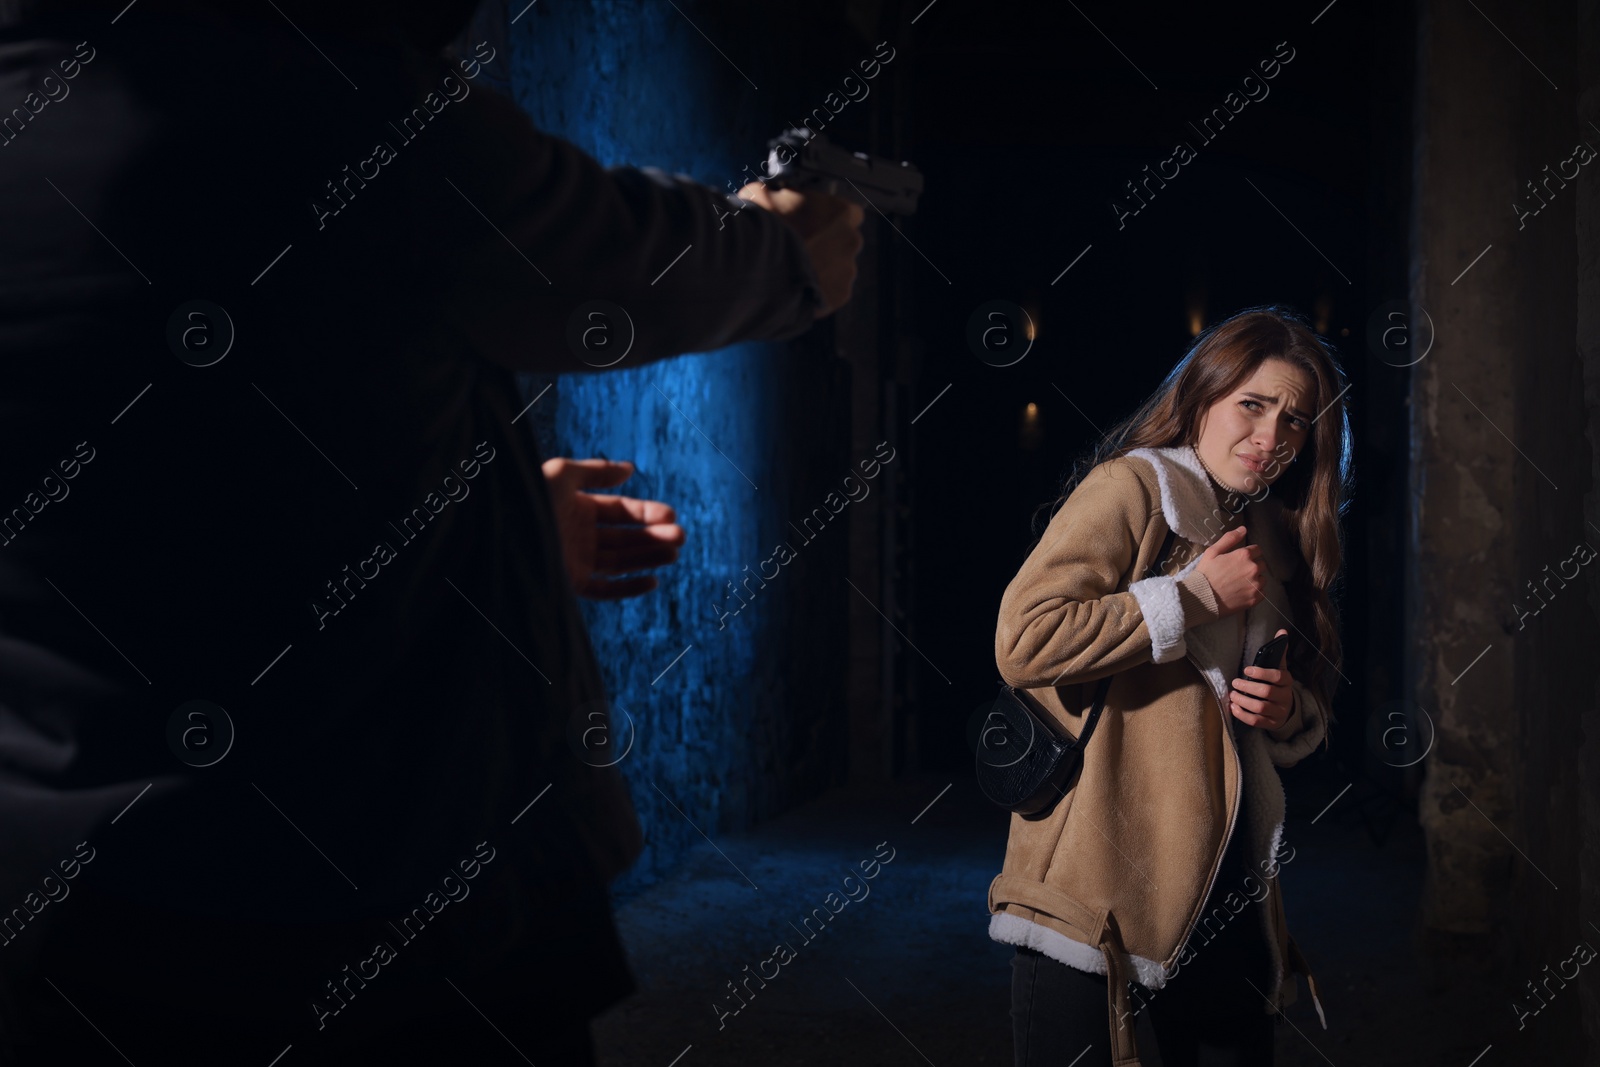 Photo of Criminal threatening young woman with gun in alley at night. Self defense concept